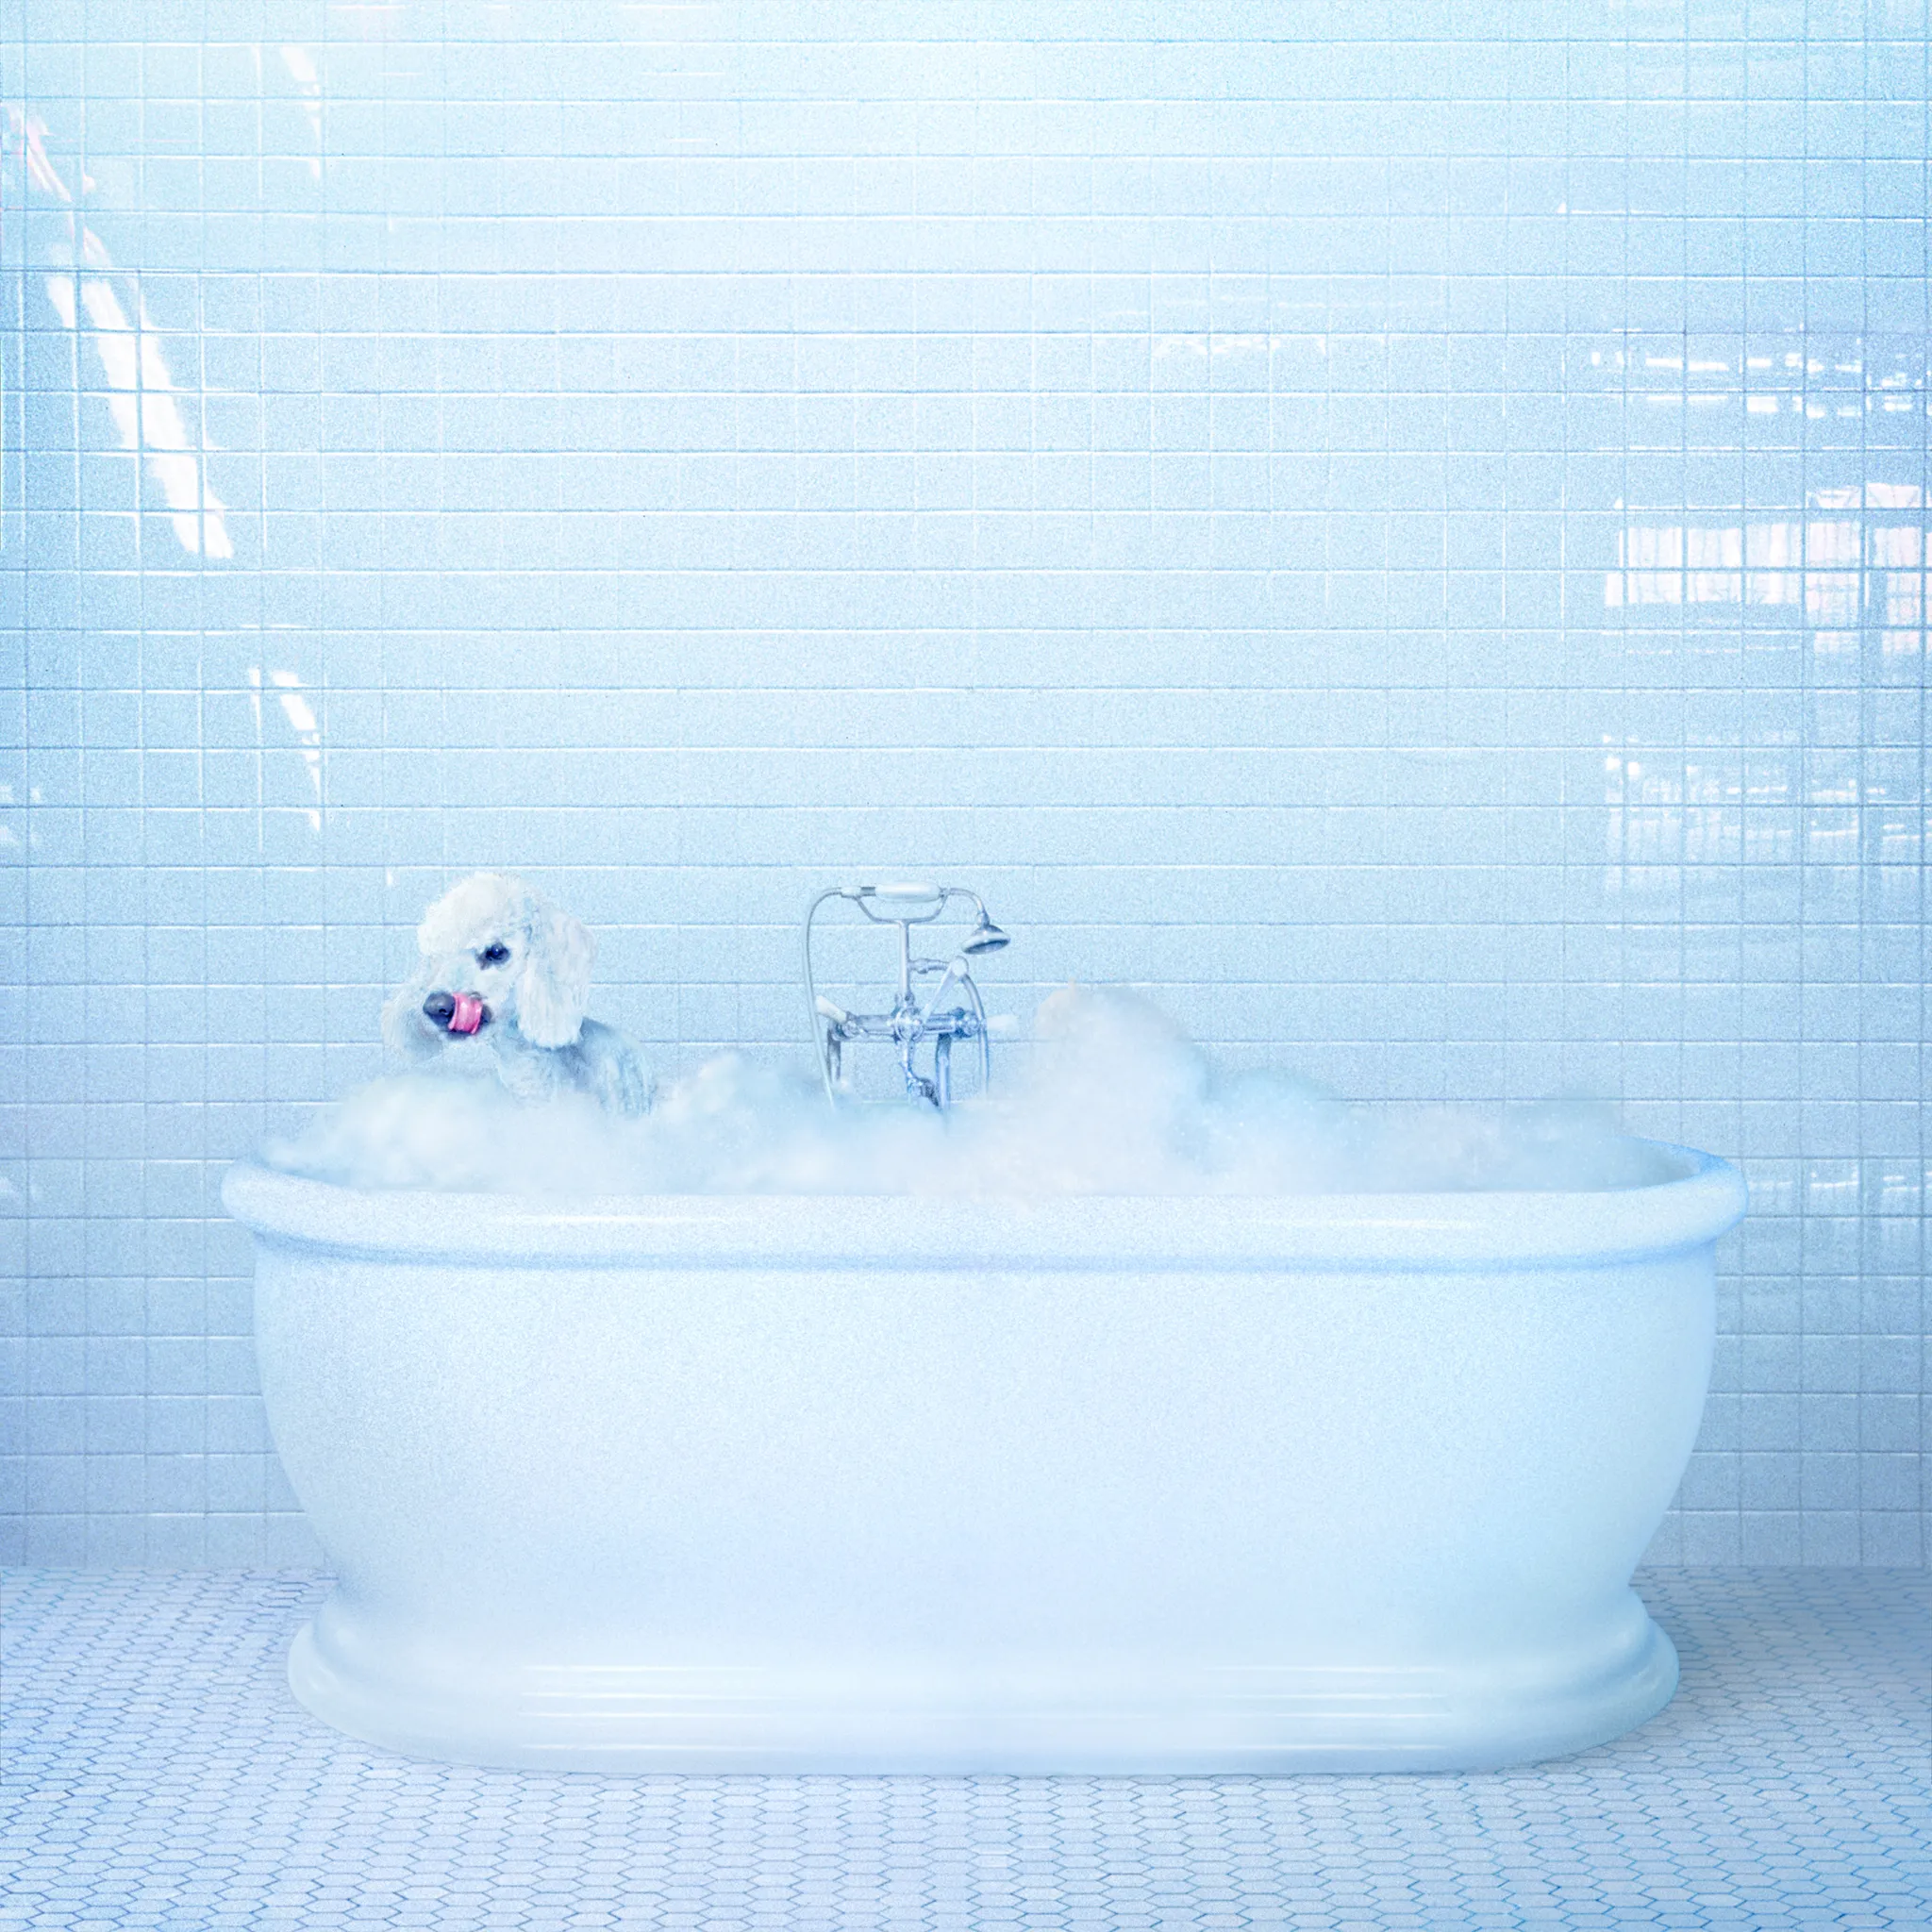 <strong>Frankie Cosmos - Vessel</strong> (Cd)